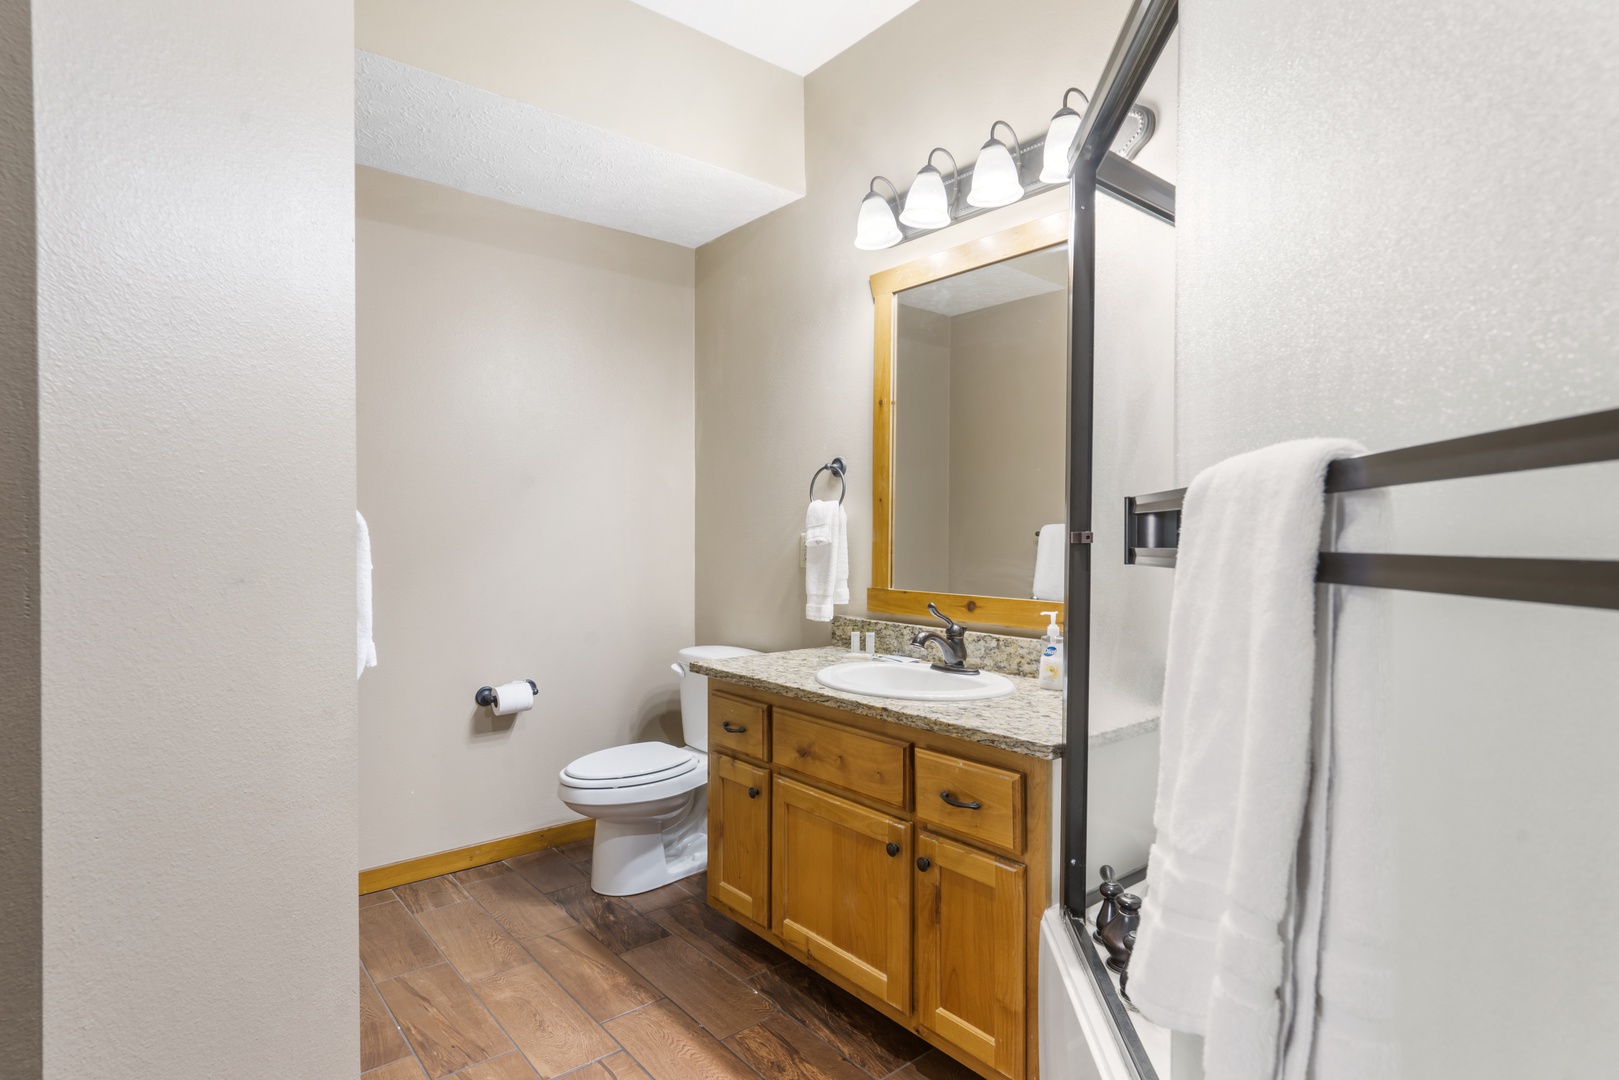 This ensuite bathroom offers a single vanity & oversized shower/tub combo